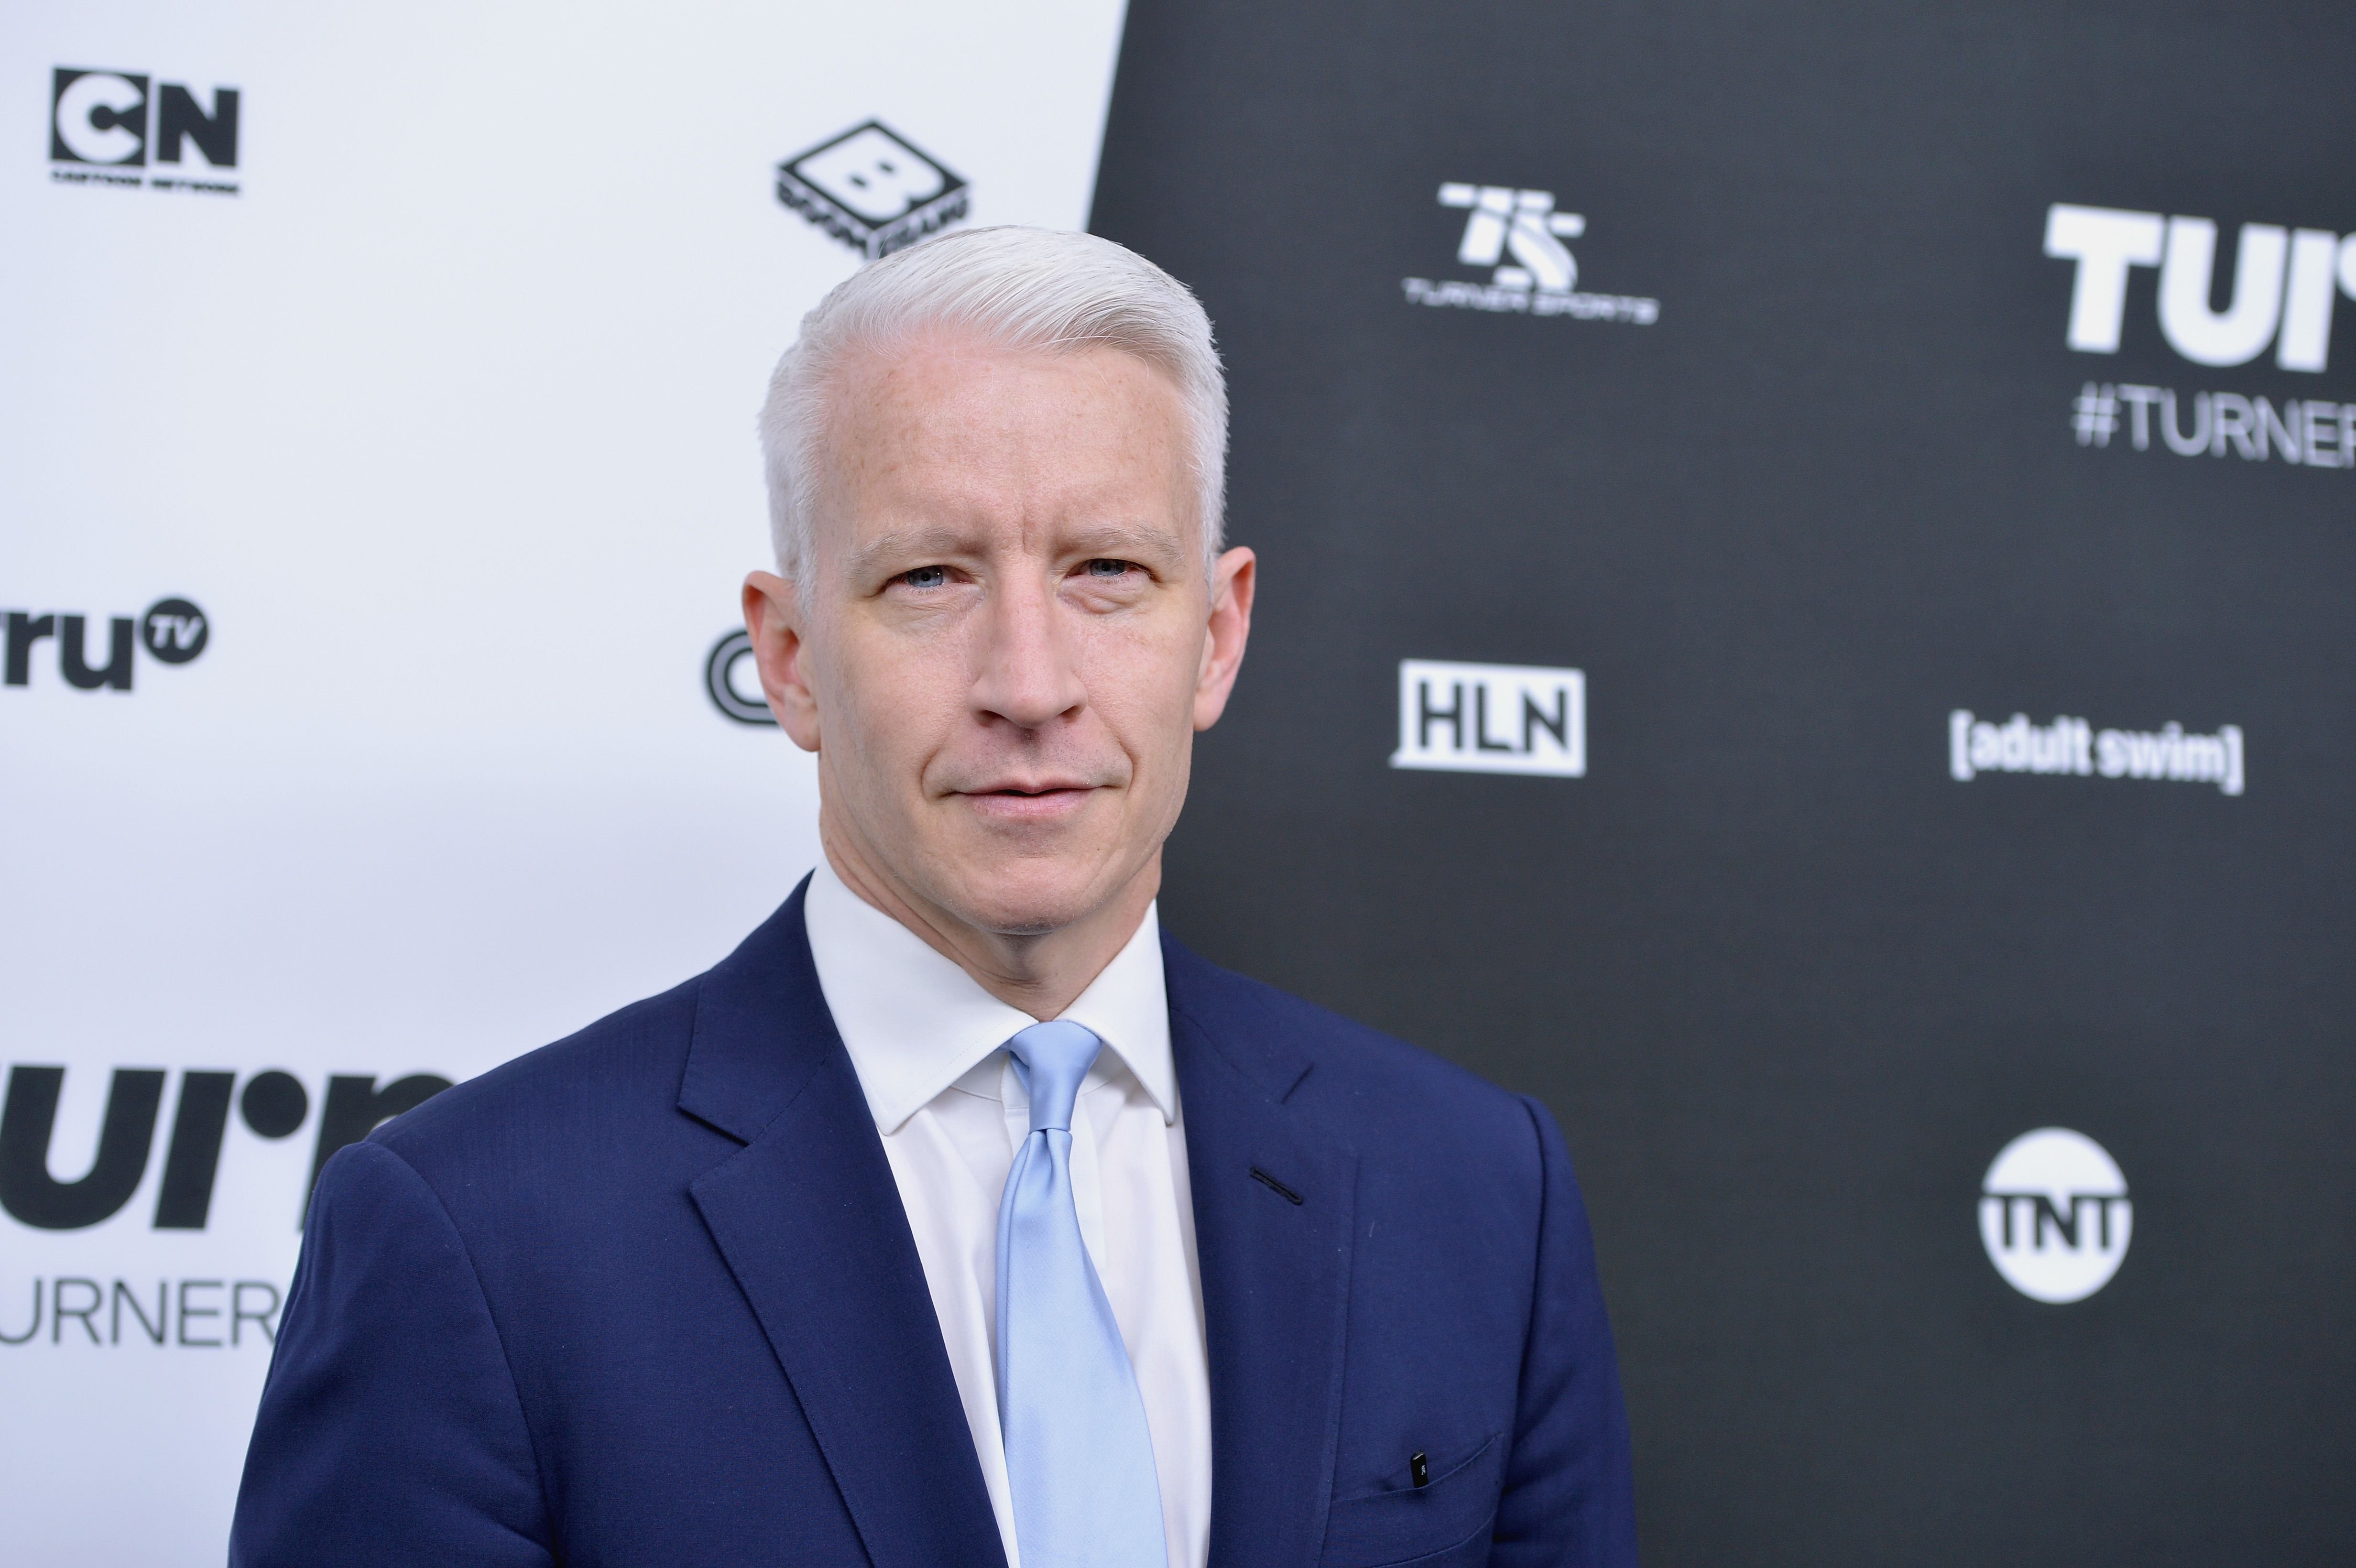 Journalist Anderson Cooper at the Turner Upfront 2016 at Nick & Stef's Steakhouse on May 18, 2016 | Photo: Getty Images